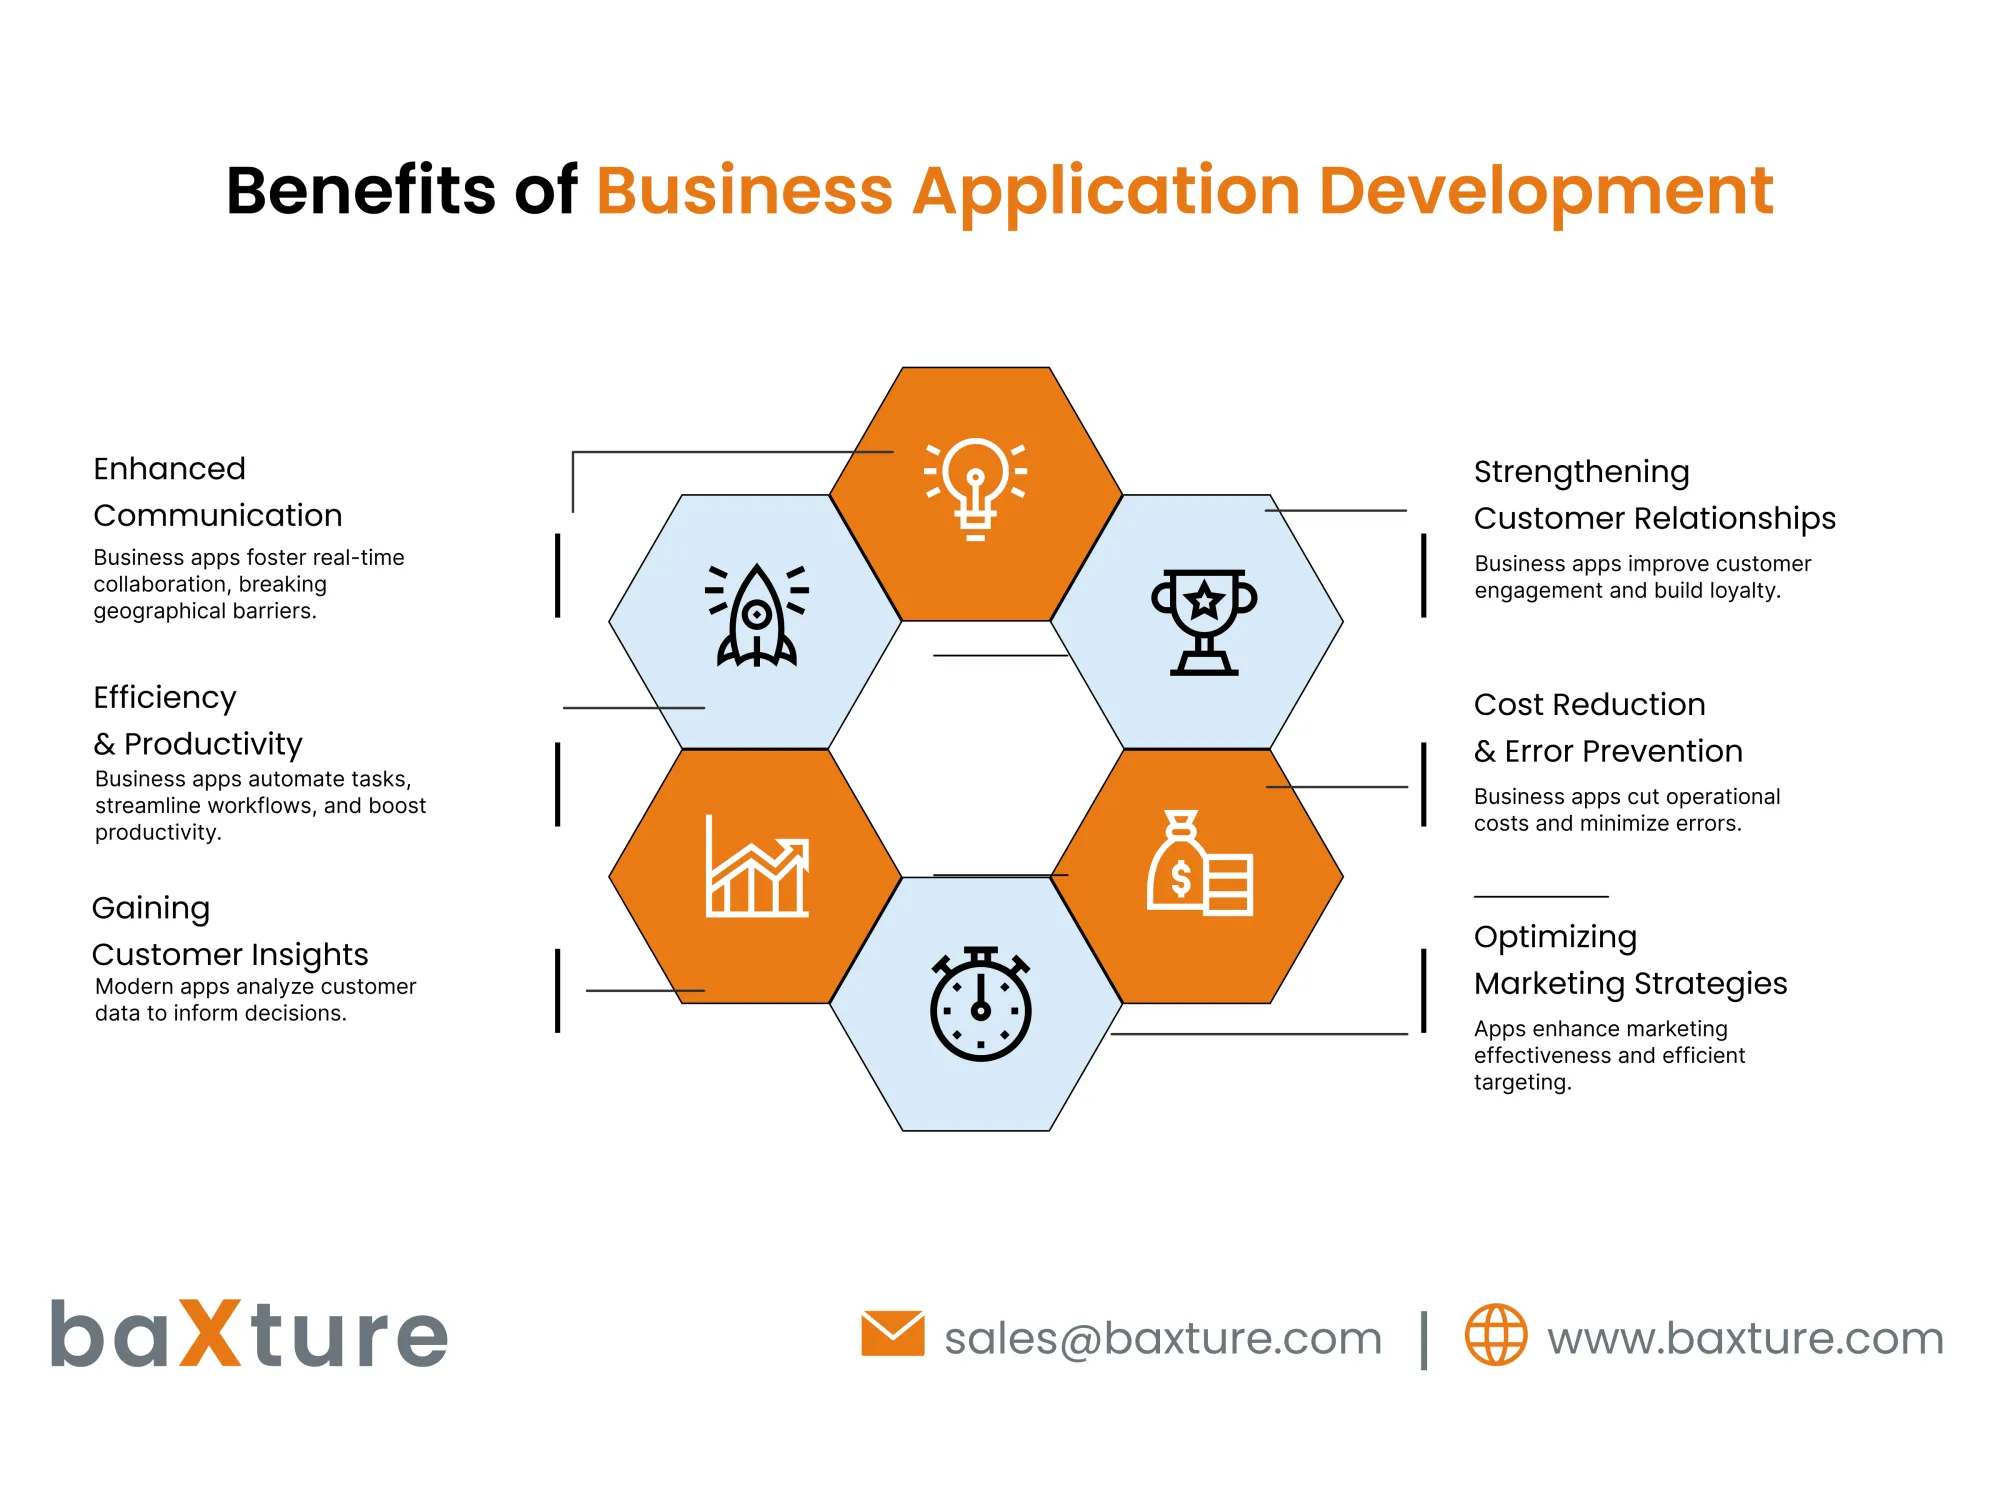 Benefits of Business Apps